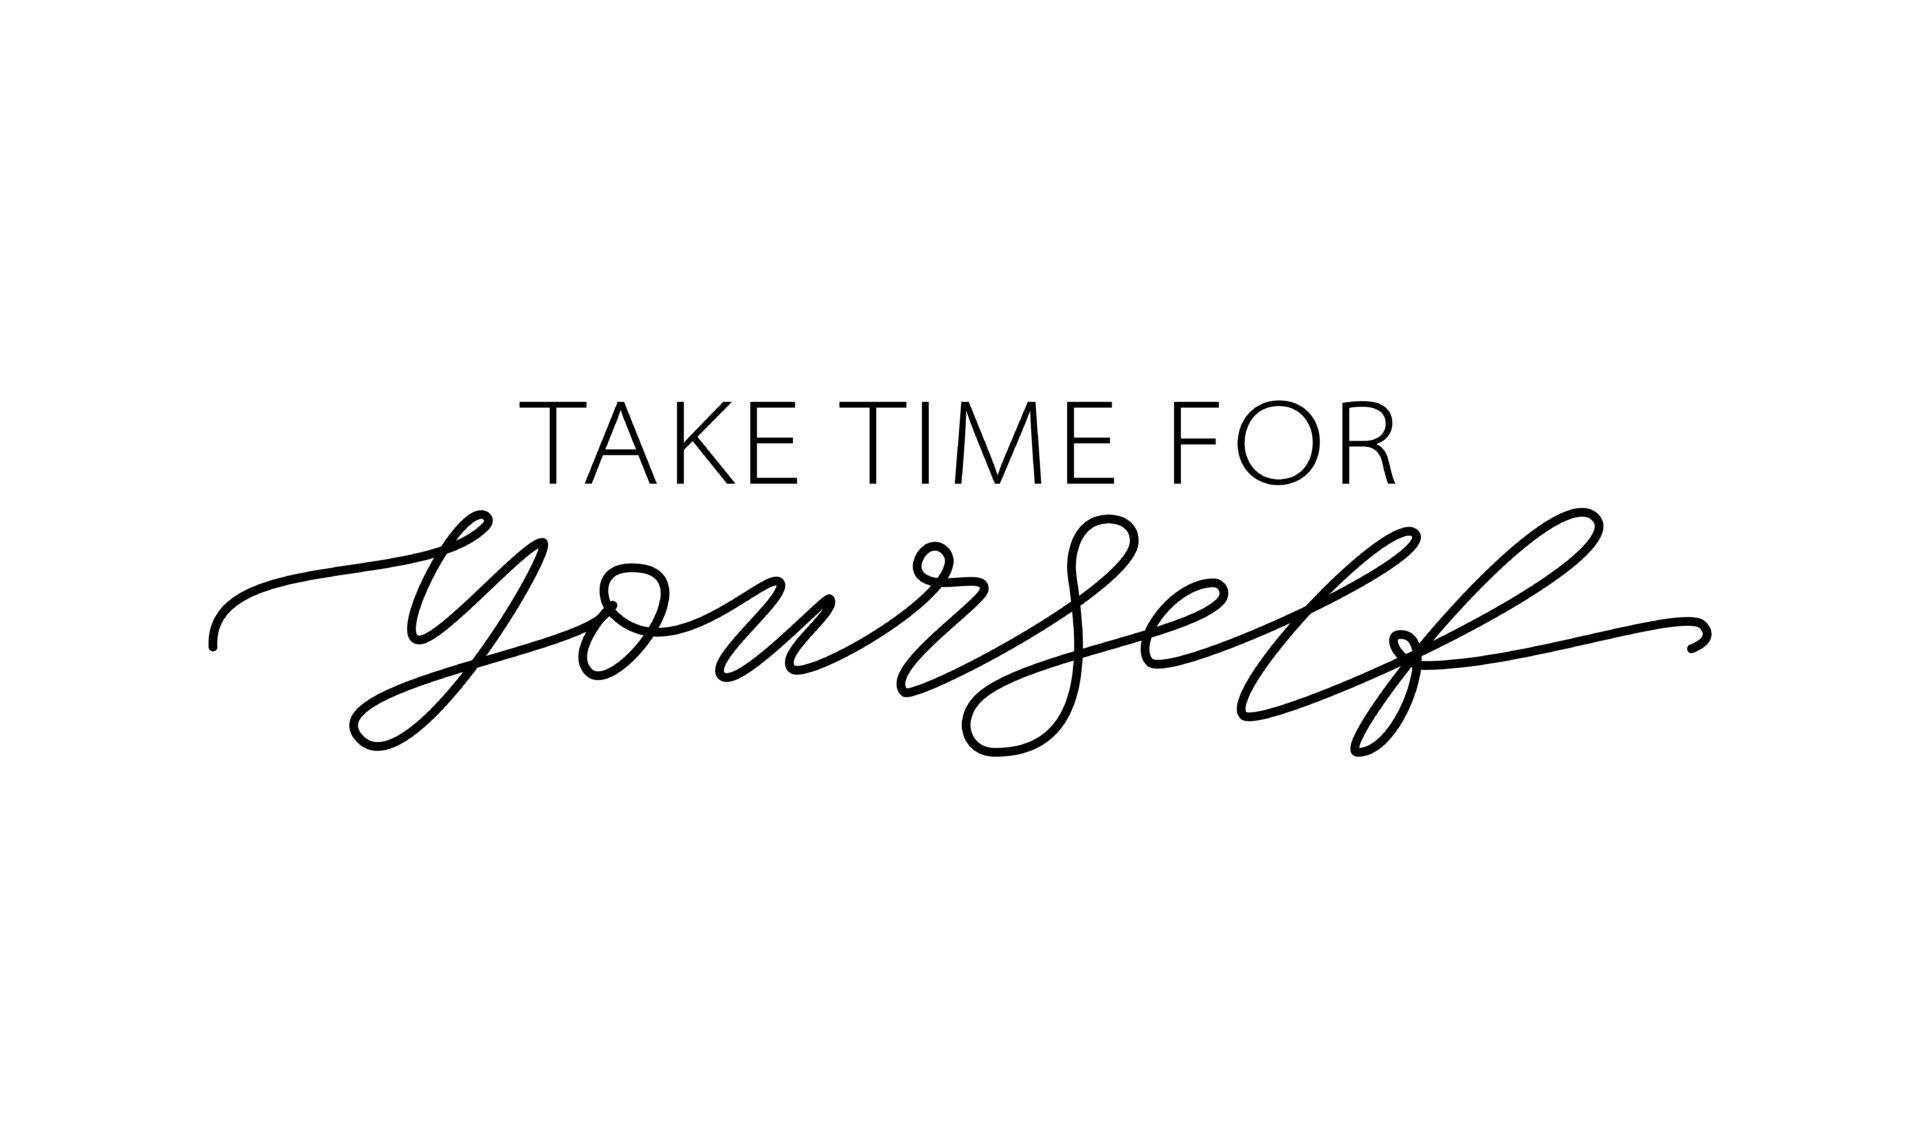 Take time for yourself. Motivation Quote Modern calligraphy text love yourself. Design print Vector illustration